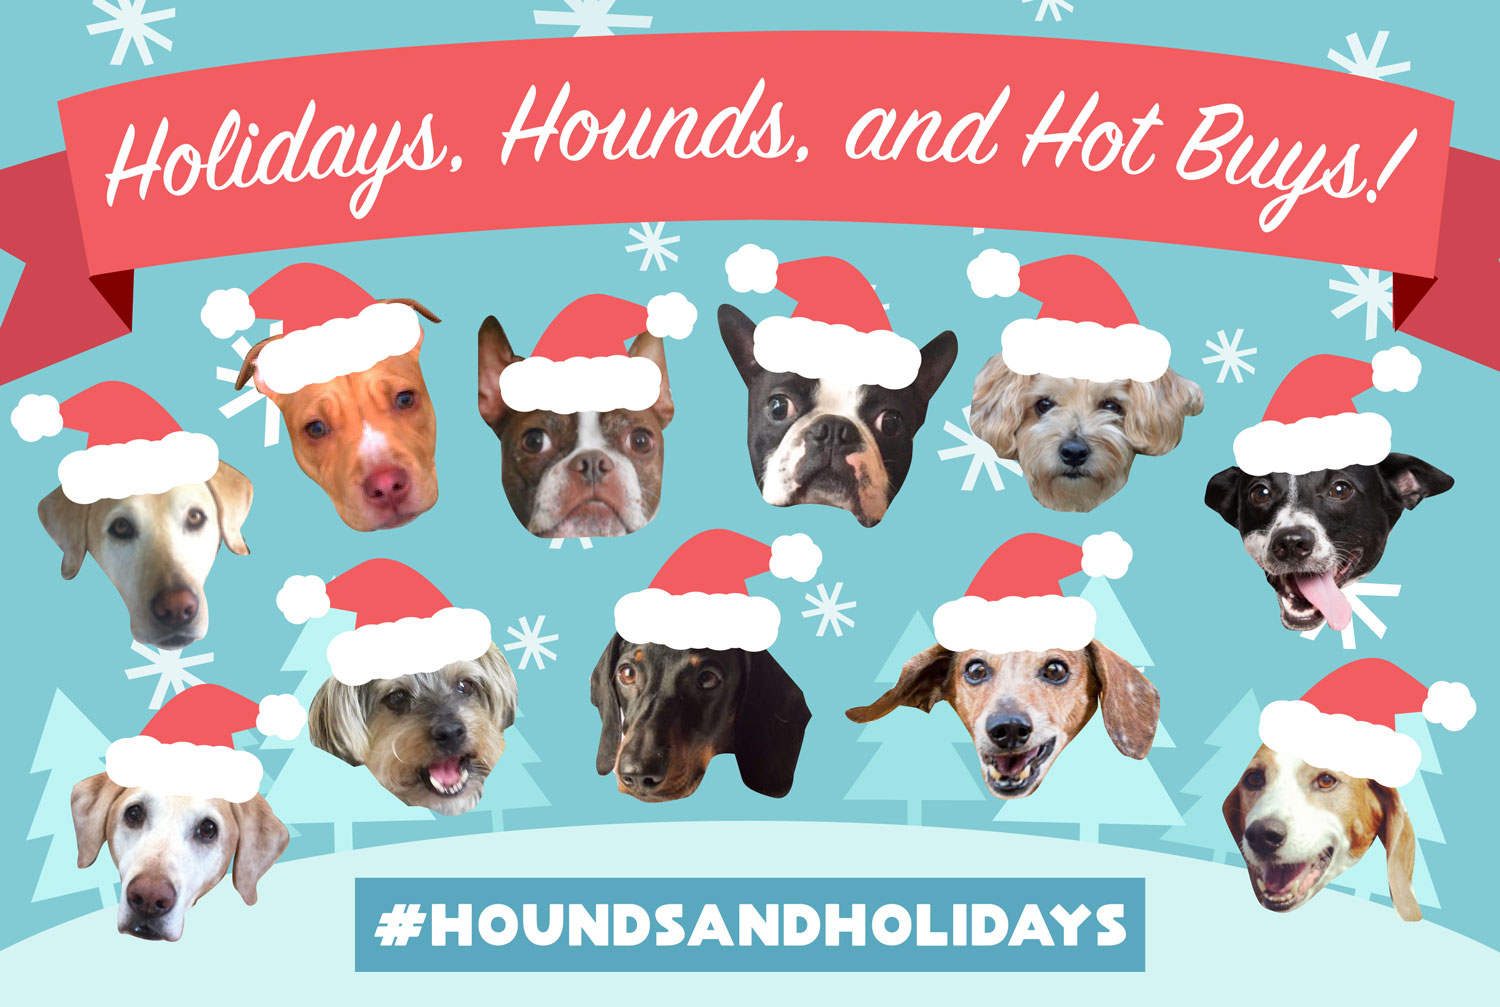 Holidays, Hounds, and Hot Buys Gift Guide Giveaway!